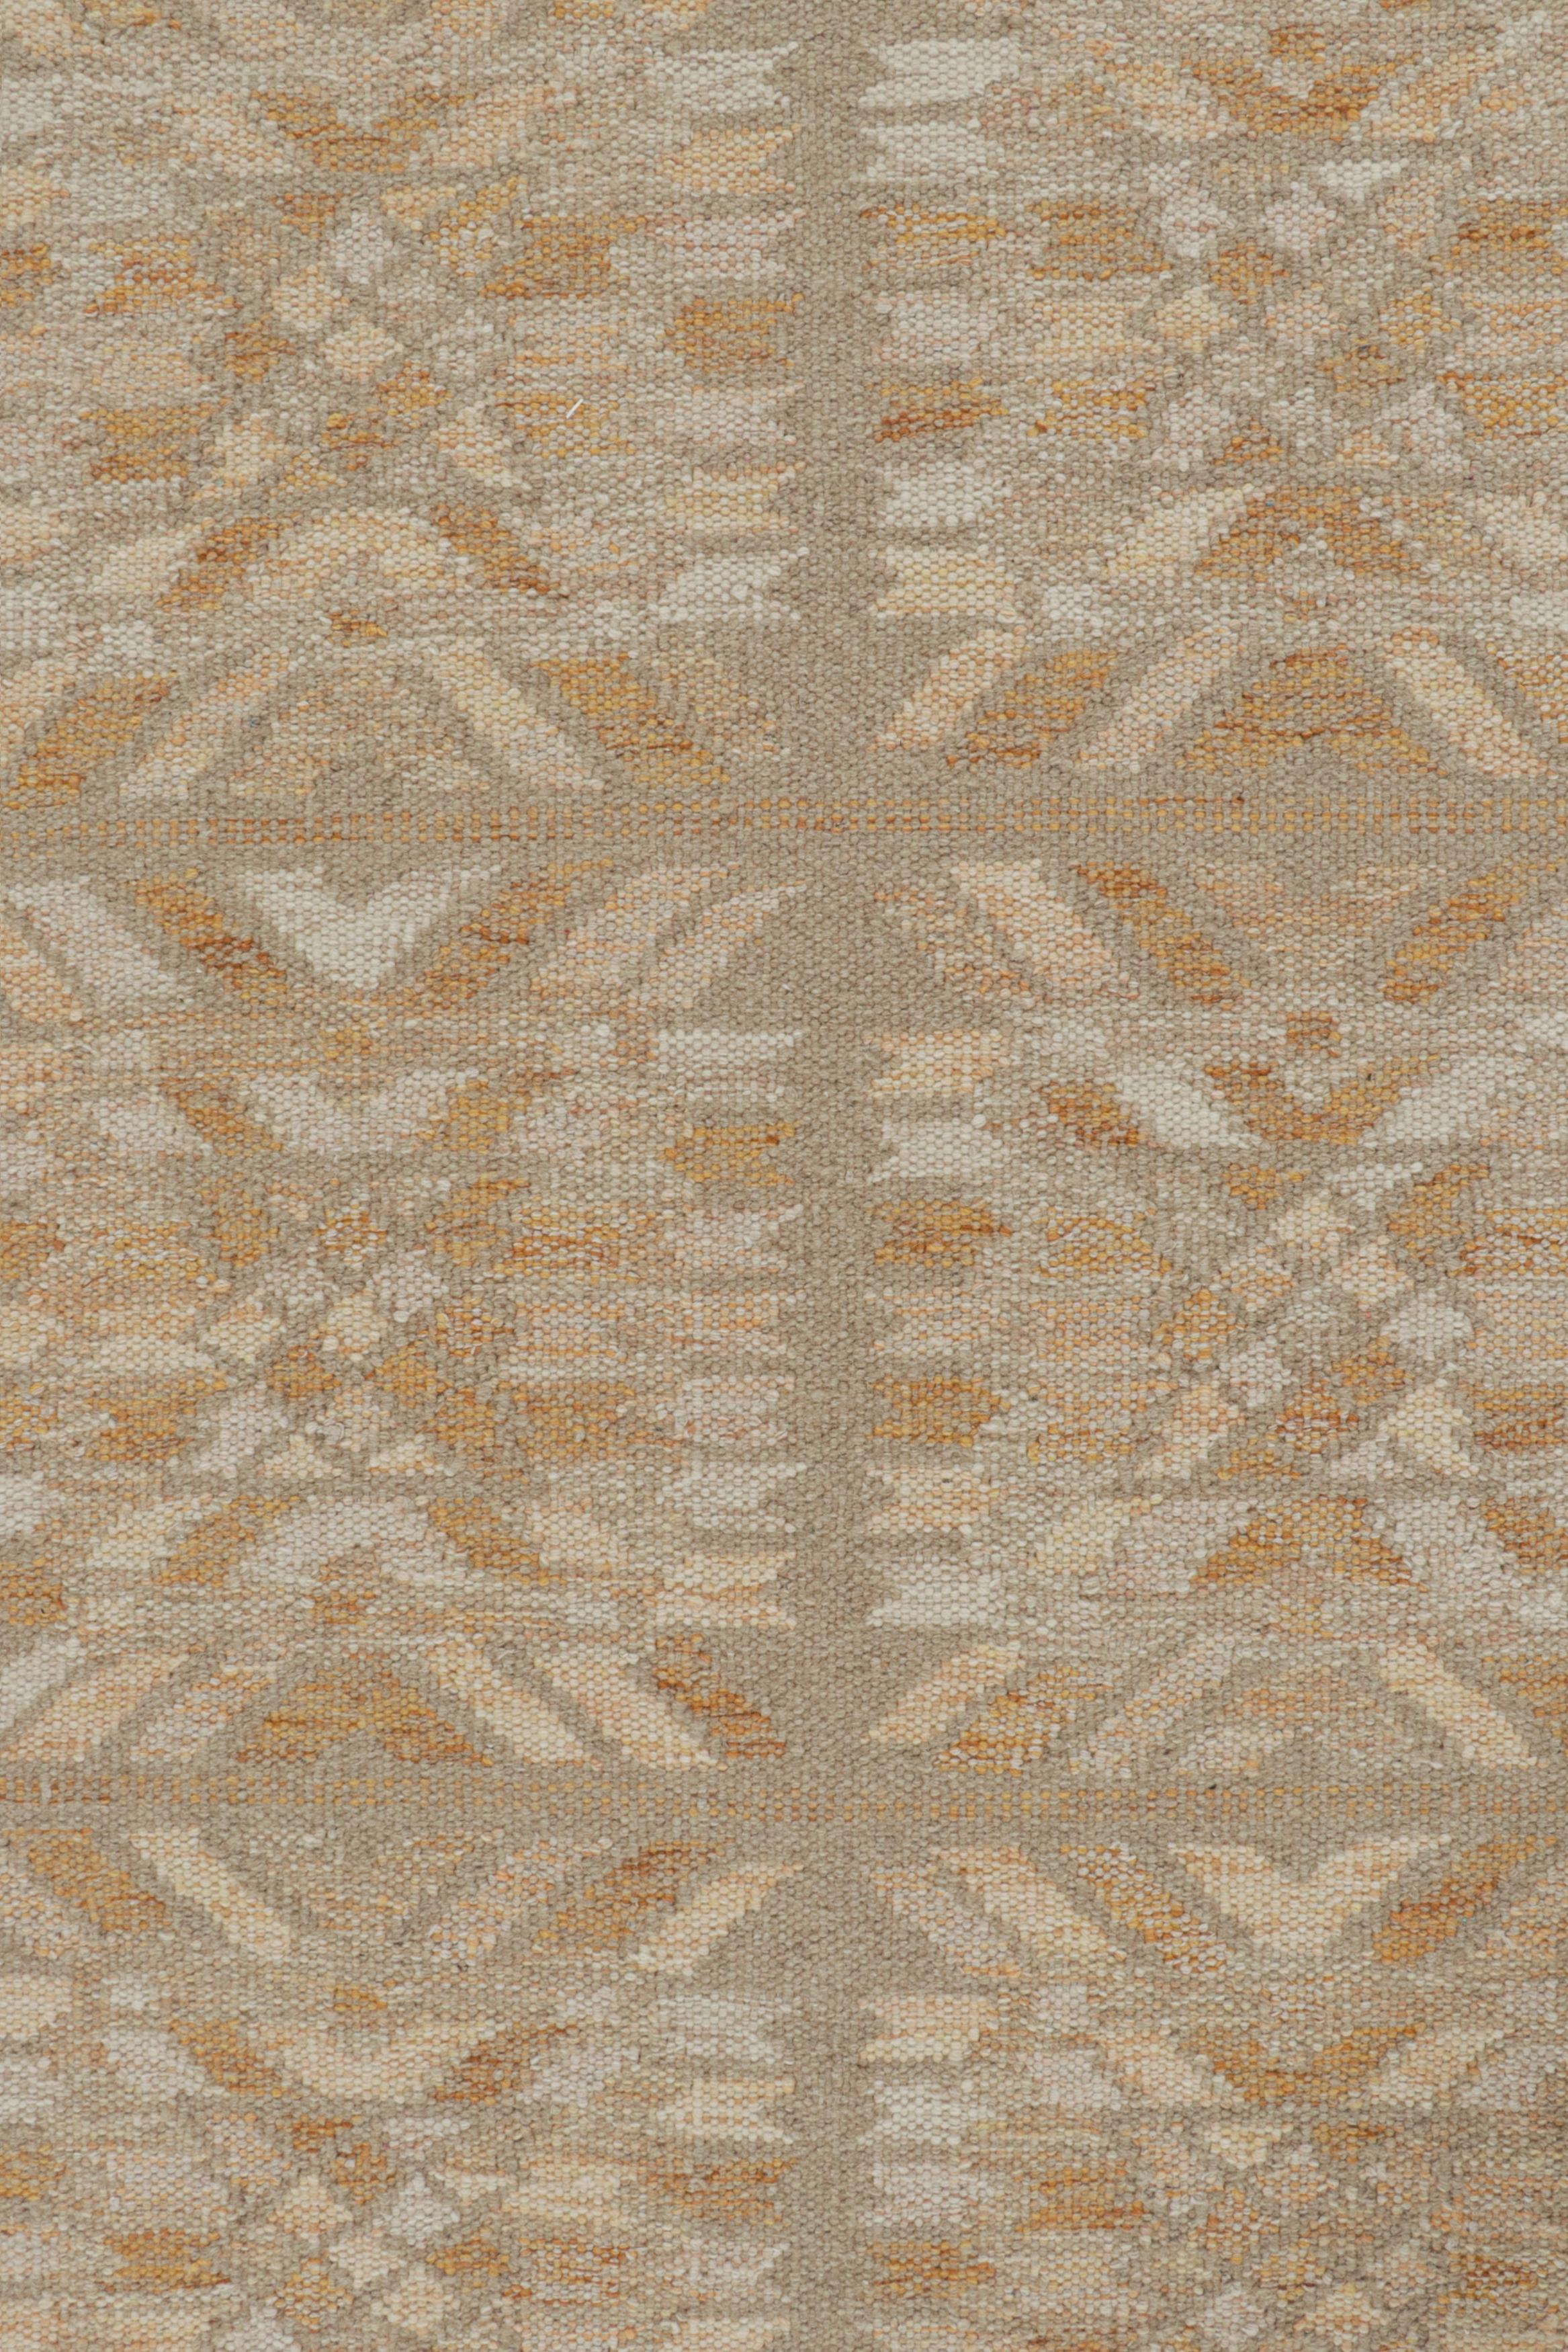 Contemporary Rug & Kilim’s Scandinavian Style Kilim in Beige and Gold Geometric Patterns For Sale